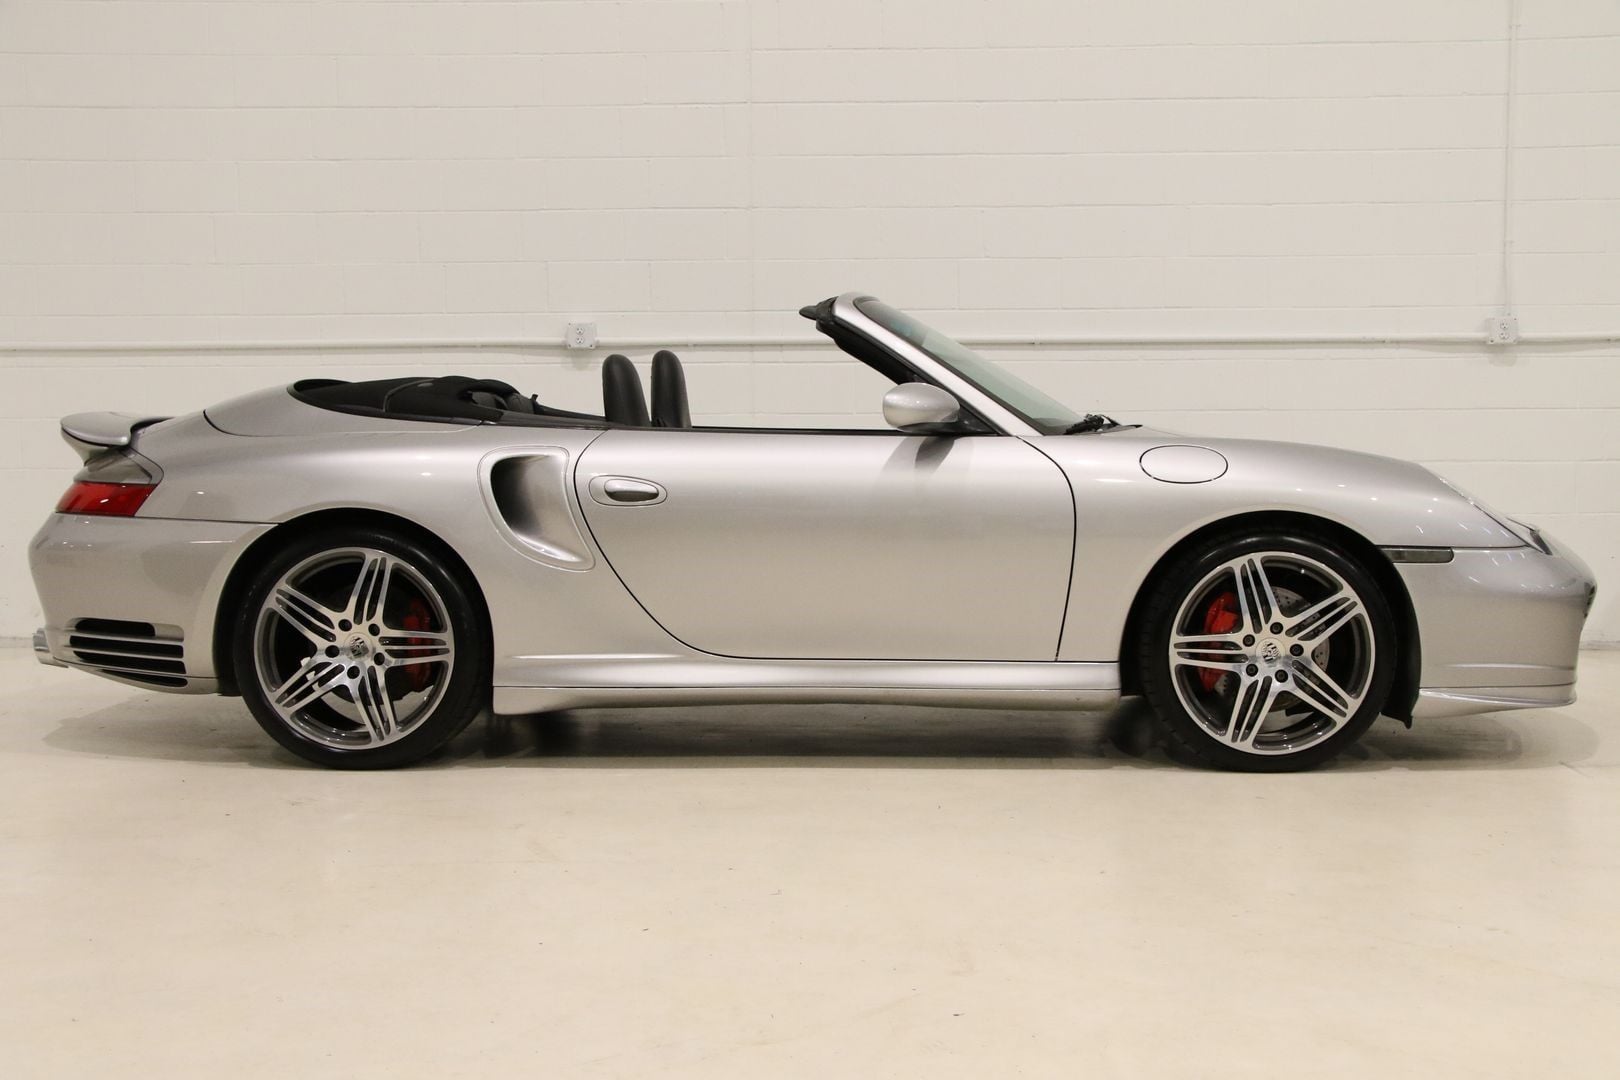 2004 Porsche 911 - Want to Trade: 2004 Porsche 911 Turbo Cabriolet (34k miles, 6 speed manual) - Used - VIN WP0CB29974S675908 - 34,000 Miles - 6 cyl - AWD - Manual - Convertible - Silver - Los Angeles, CA 90036, United States